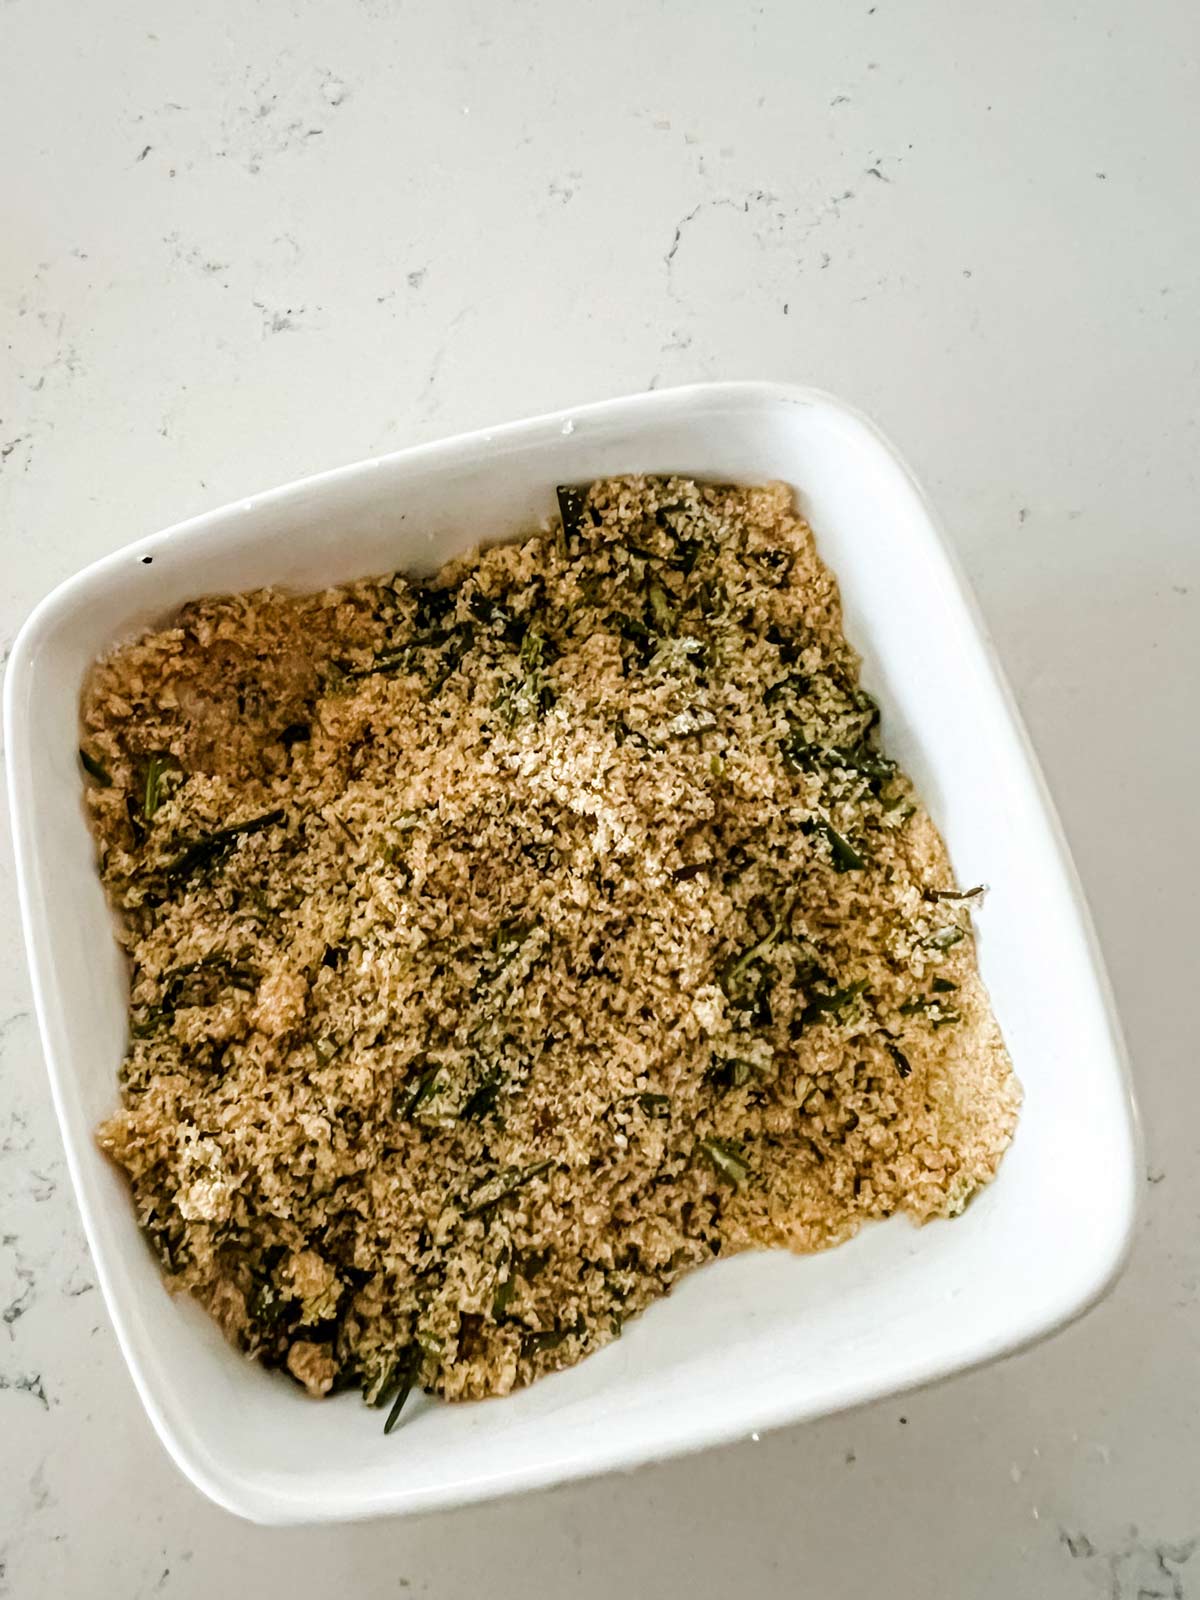 Rosemary, brown sugar, garlic powder, salt, and pepper mixed together in a small dish.